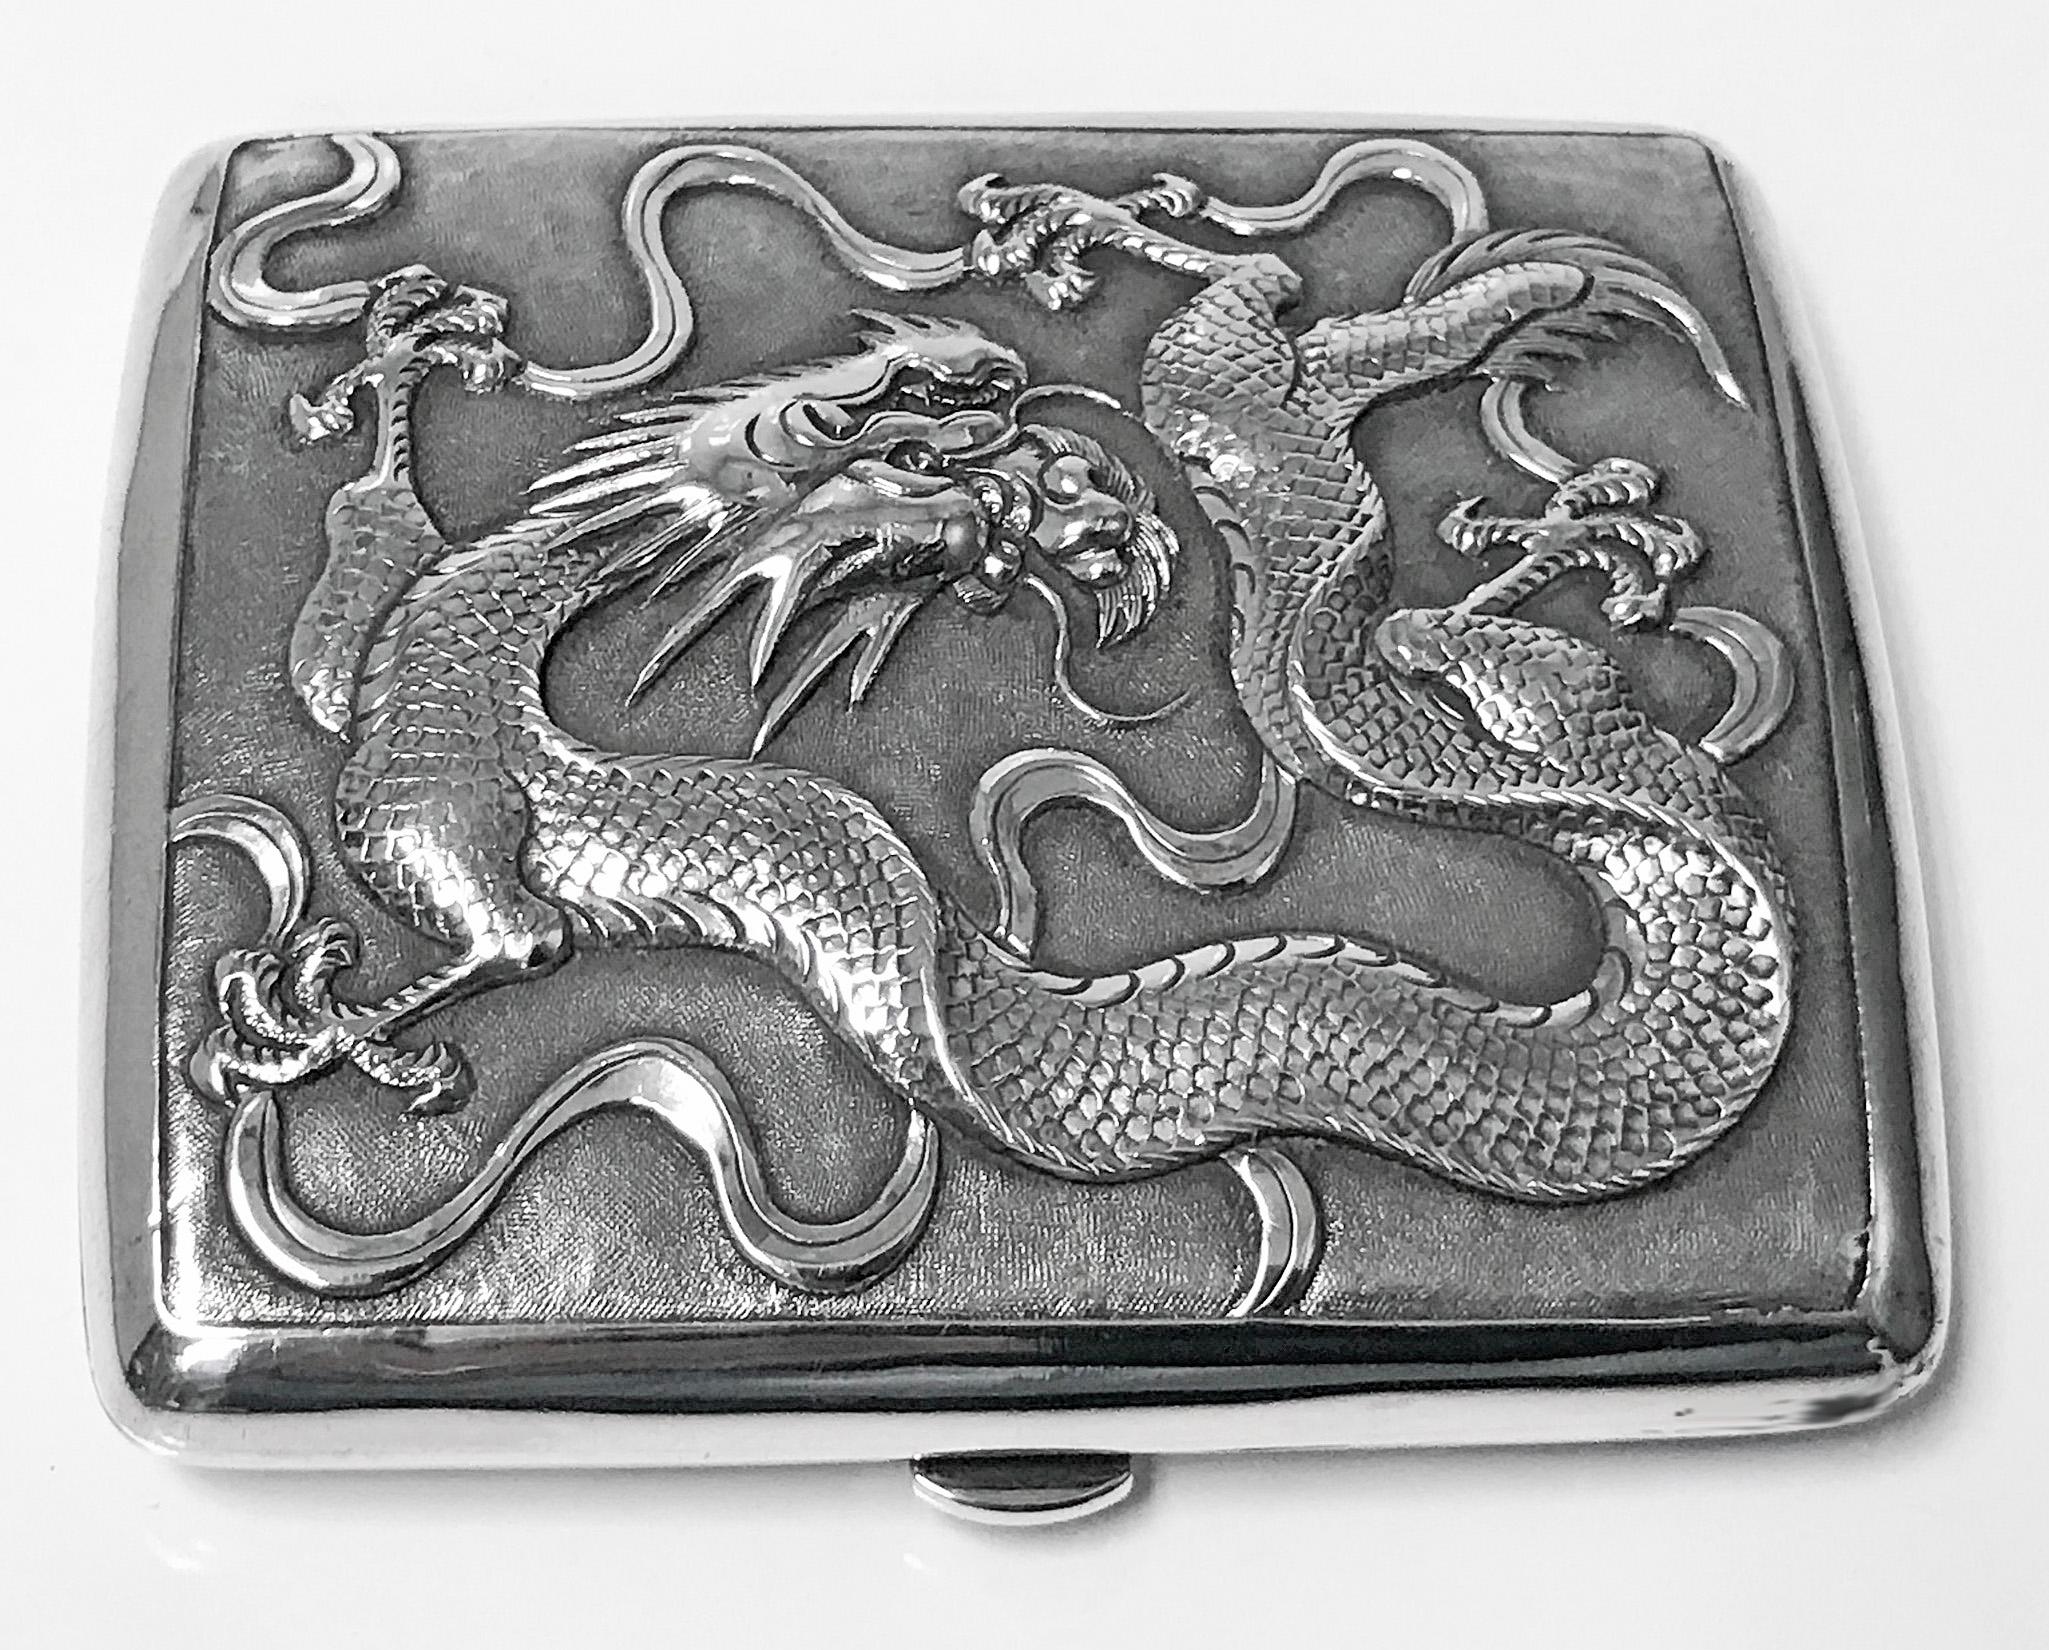 Antique Chinese export silver cigarette case, TC for Tuck Chang, circa 1900. The box of concave form one side with reliefs of dragons, the other side plain, gilded interior. Hallmarked 90, Chinese characters and TC. Measures: 3.25 x 3.0 x .50